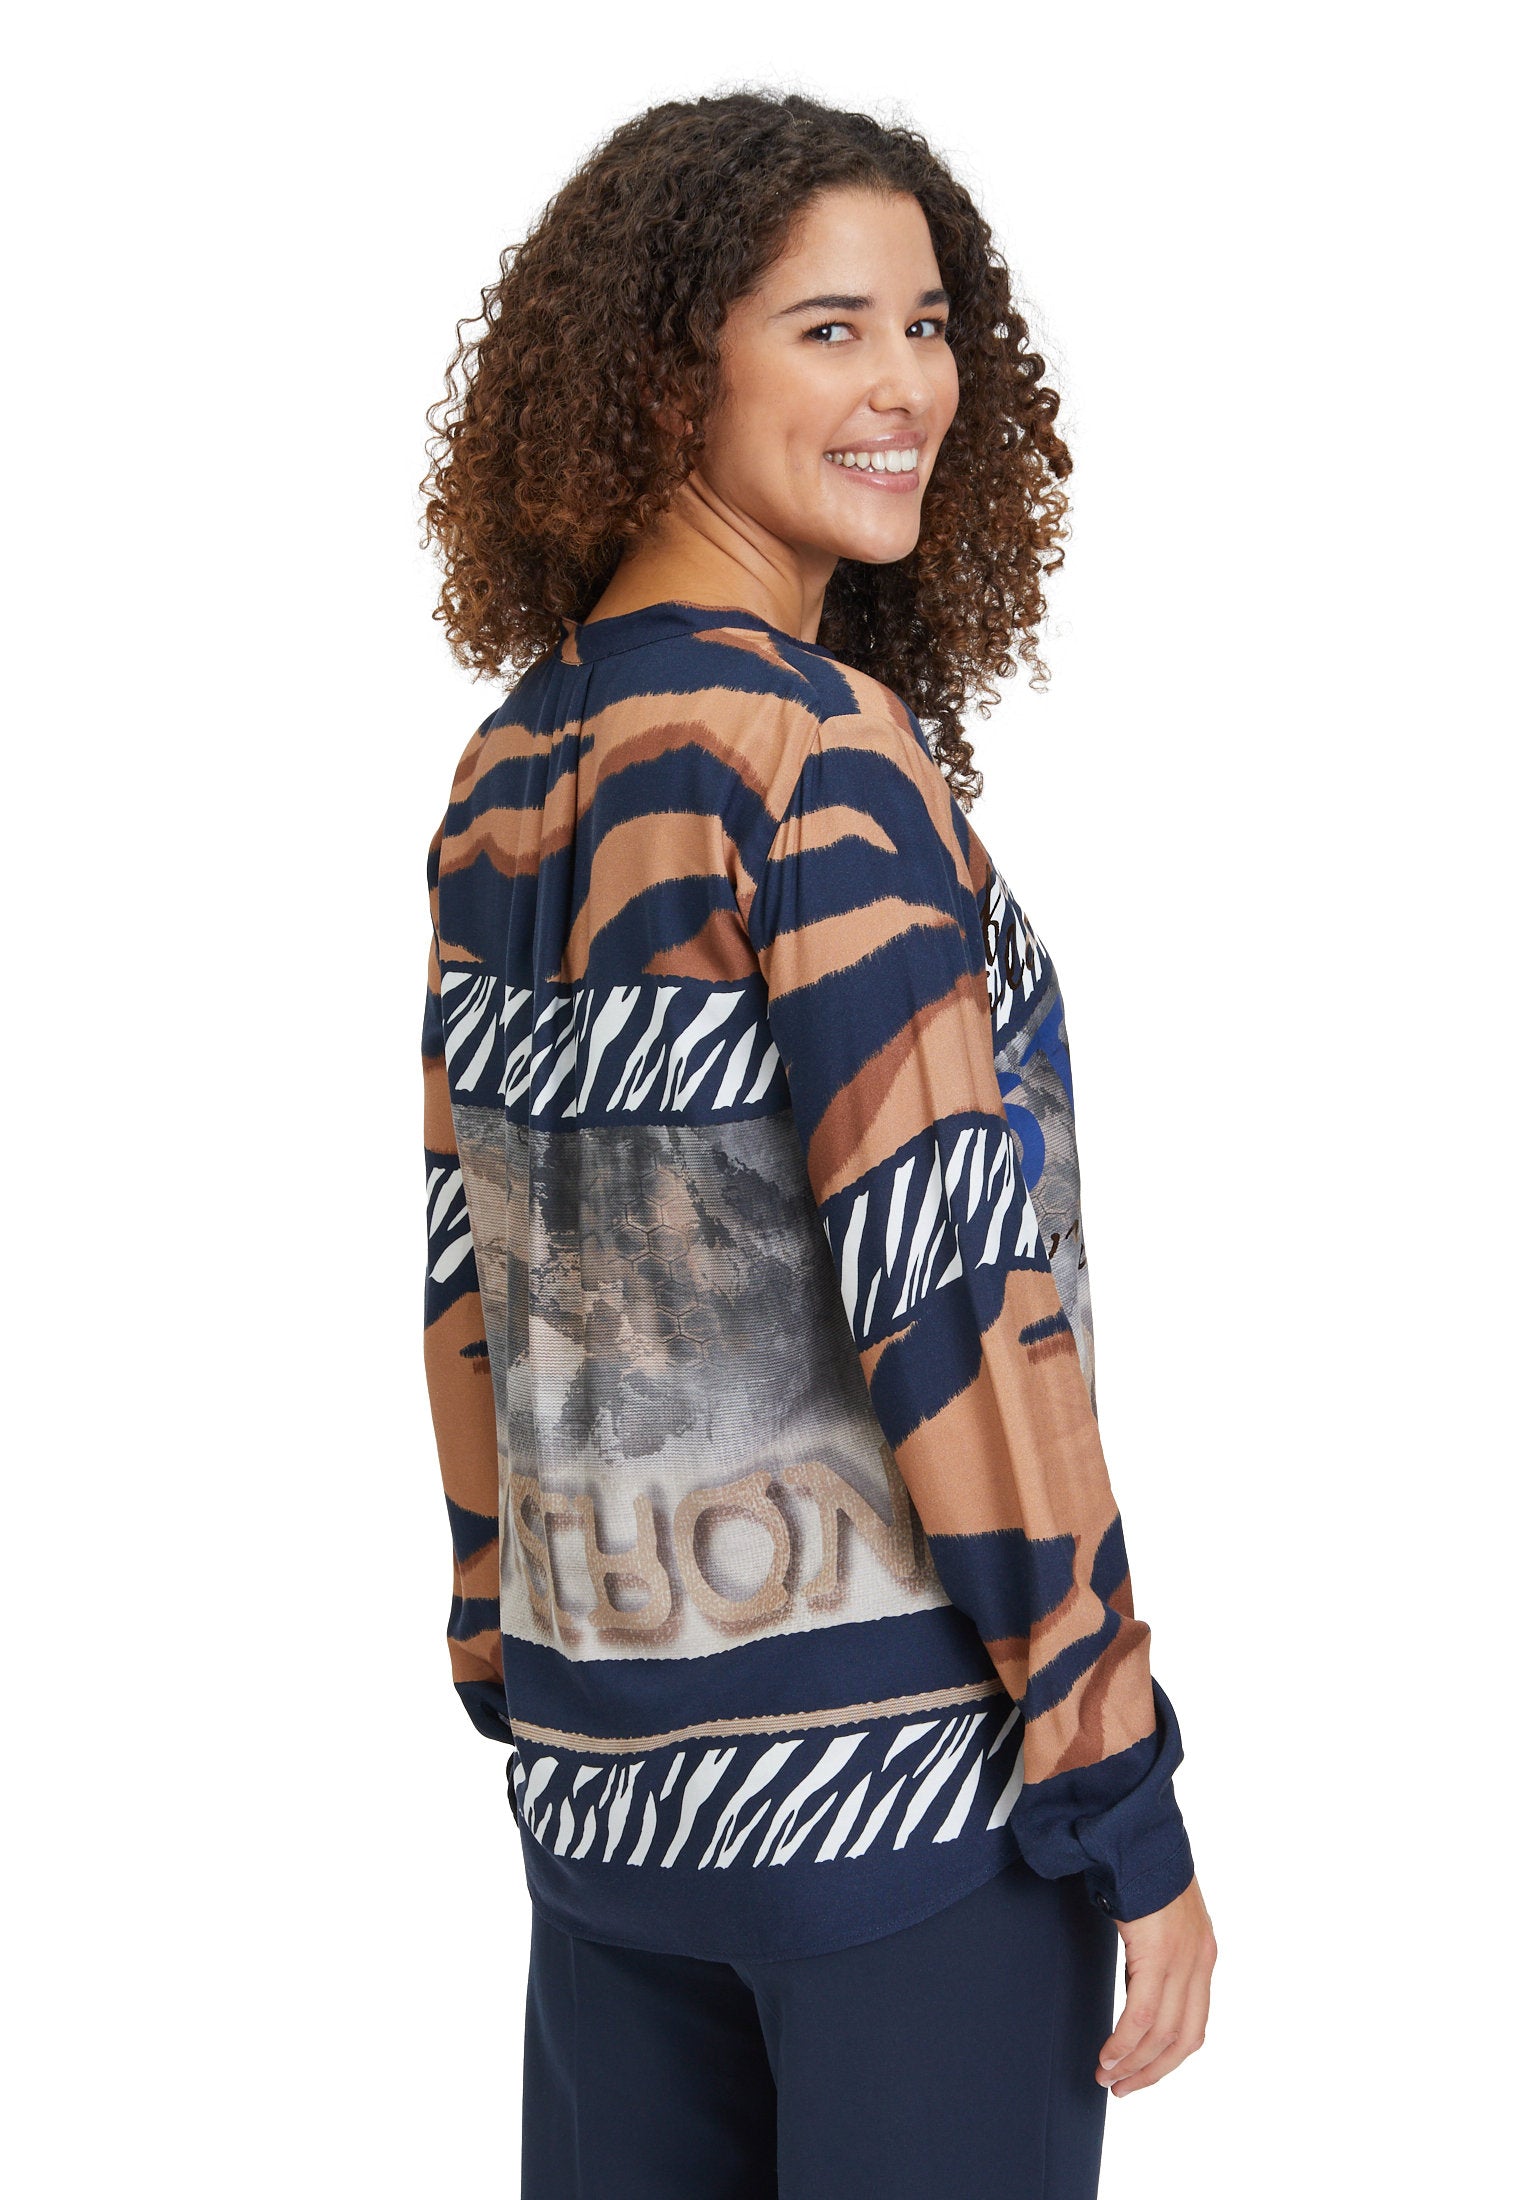 Blouse With All-Over Print _8633-2001_8881_04